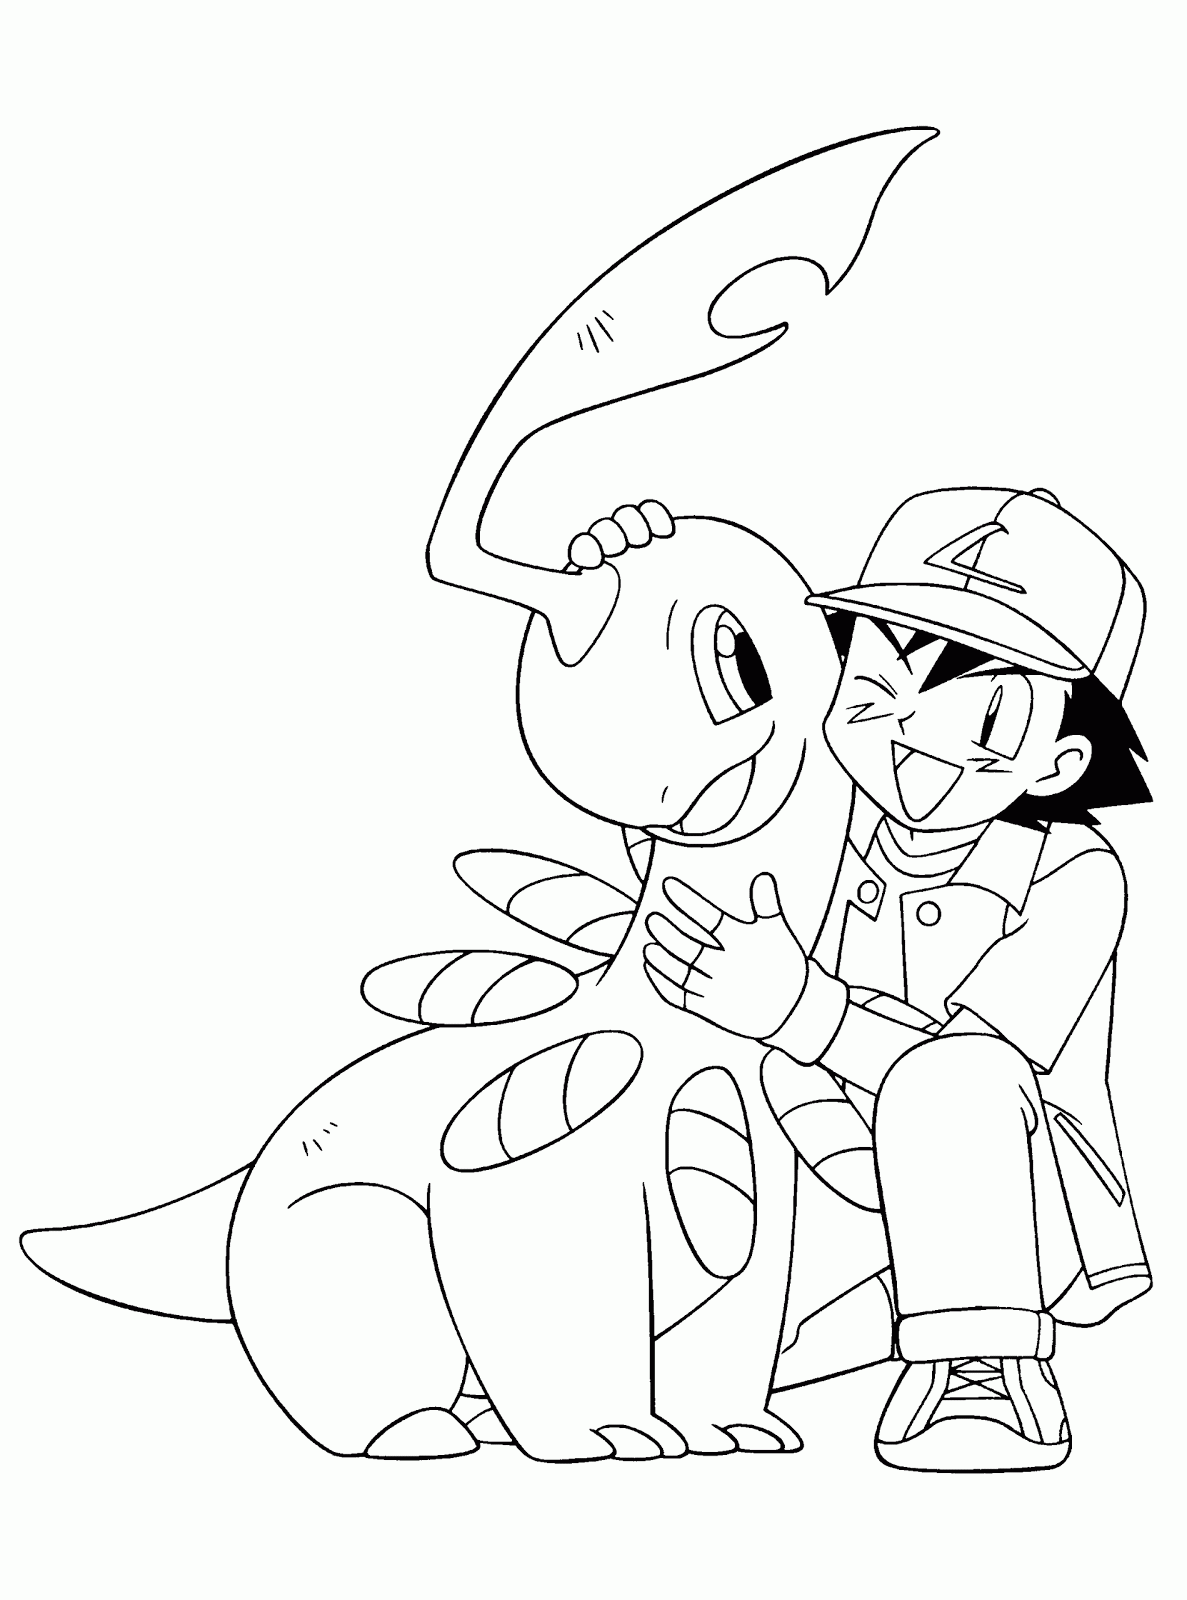 Pokemon Coloring Pages | Coloring pages for kids | coloring pages for boys | #29